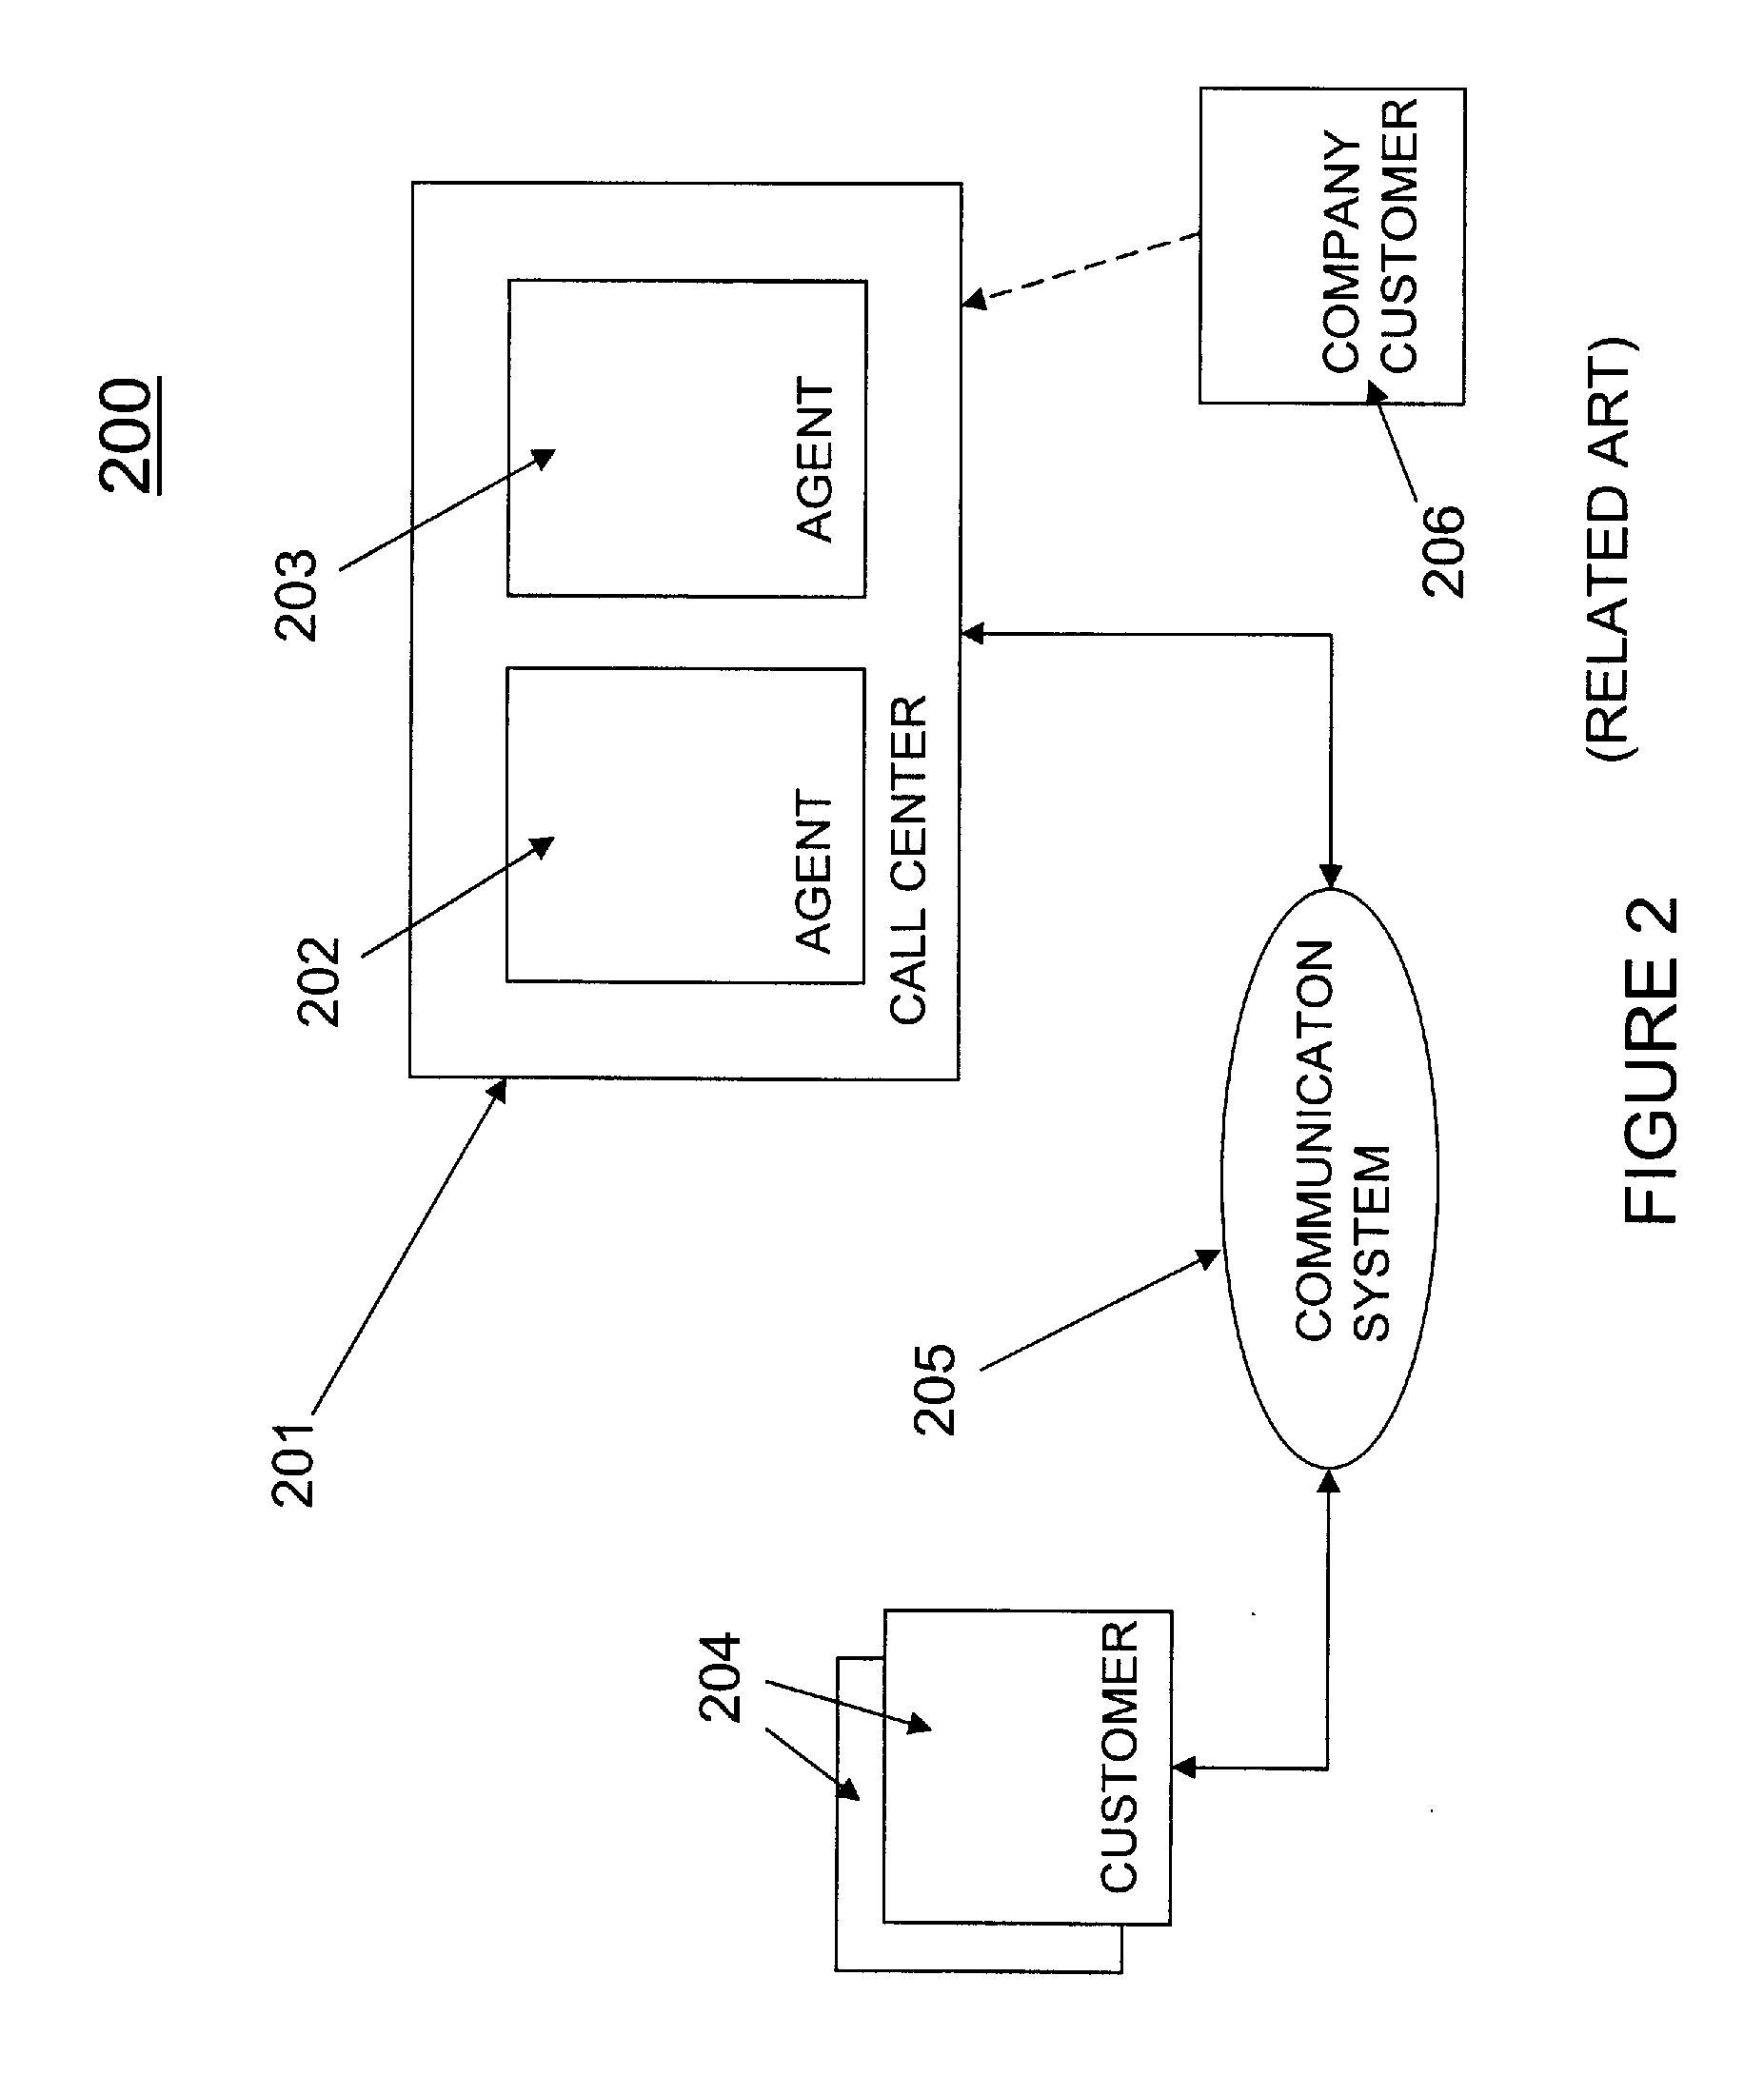 Method and structure for increasing revenue for on-demand environments